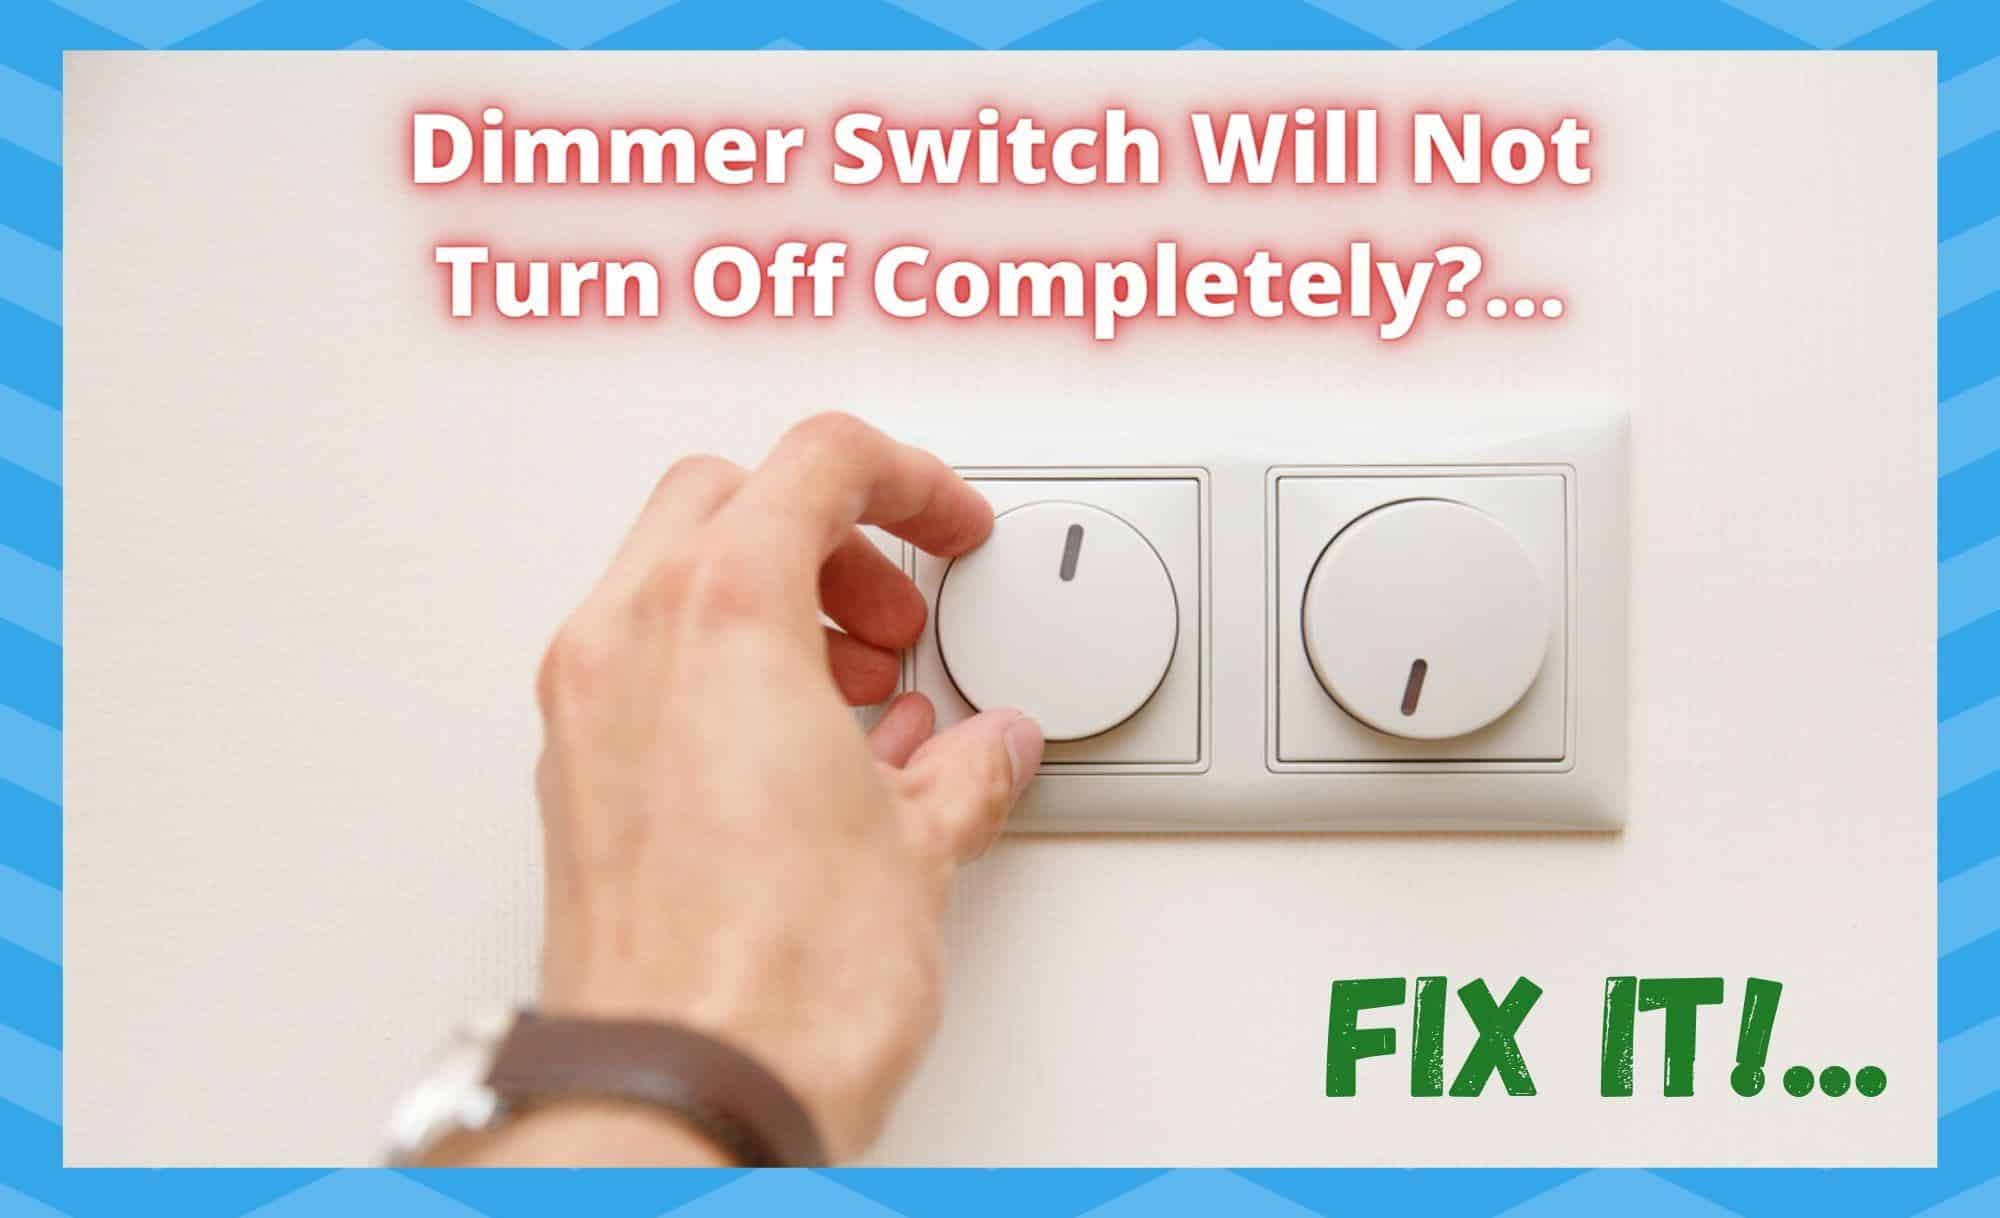 Dimmer Switch Will Not Turn Off Completely